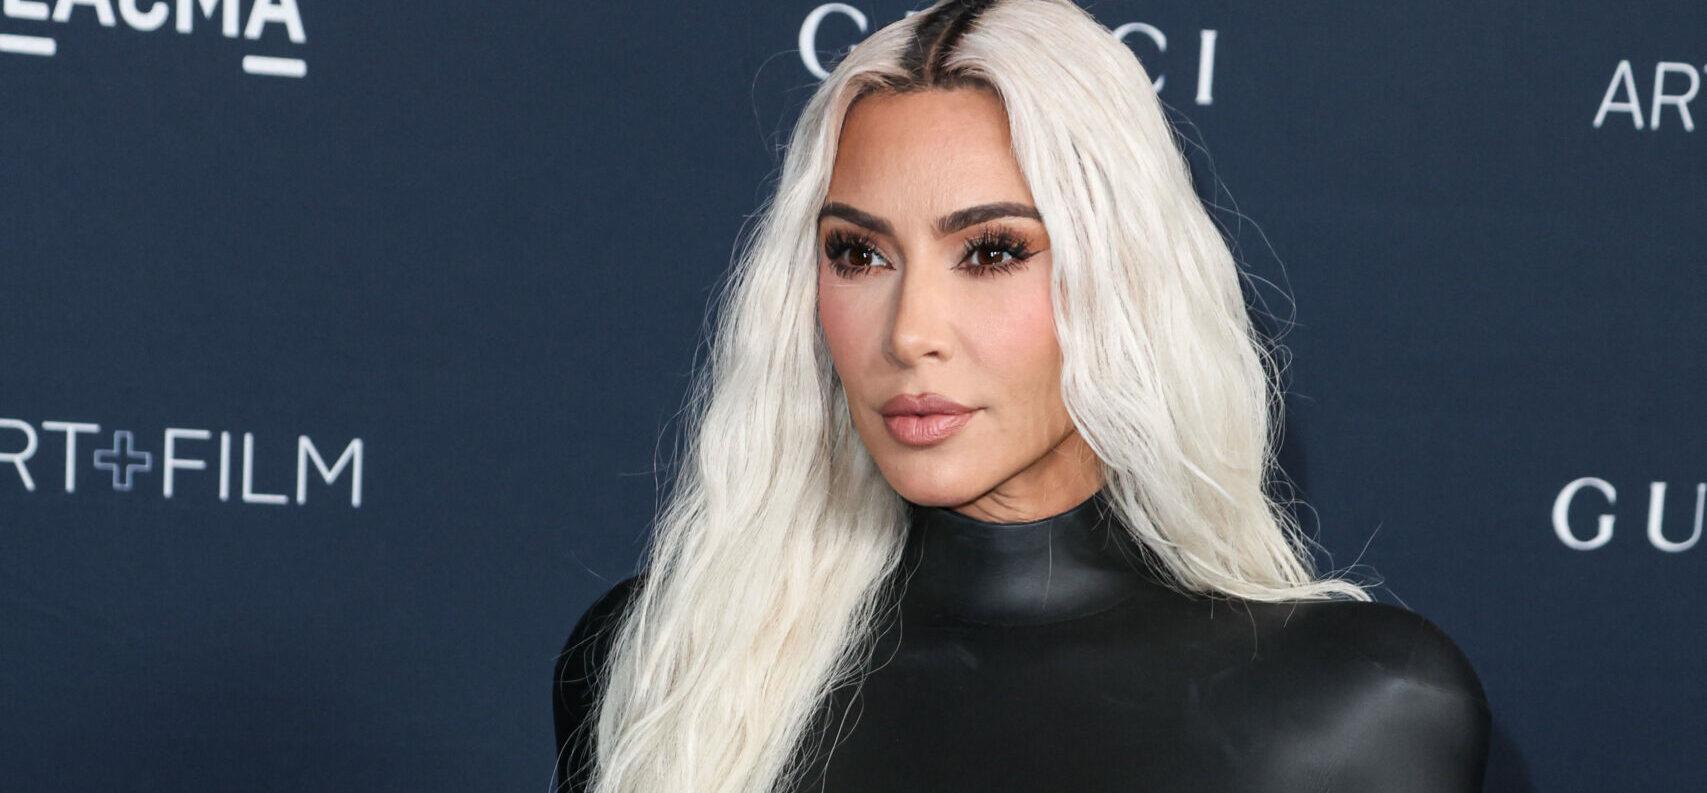 Kim Kardashian Breaks Silence On Balenciaga Child Bondage Controversy: 'Disgusted And Outraged'